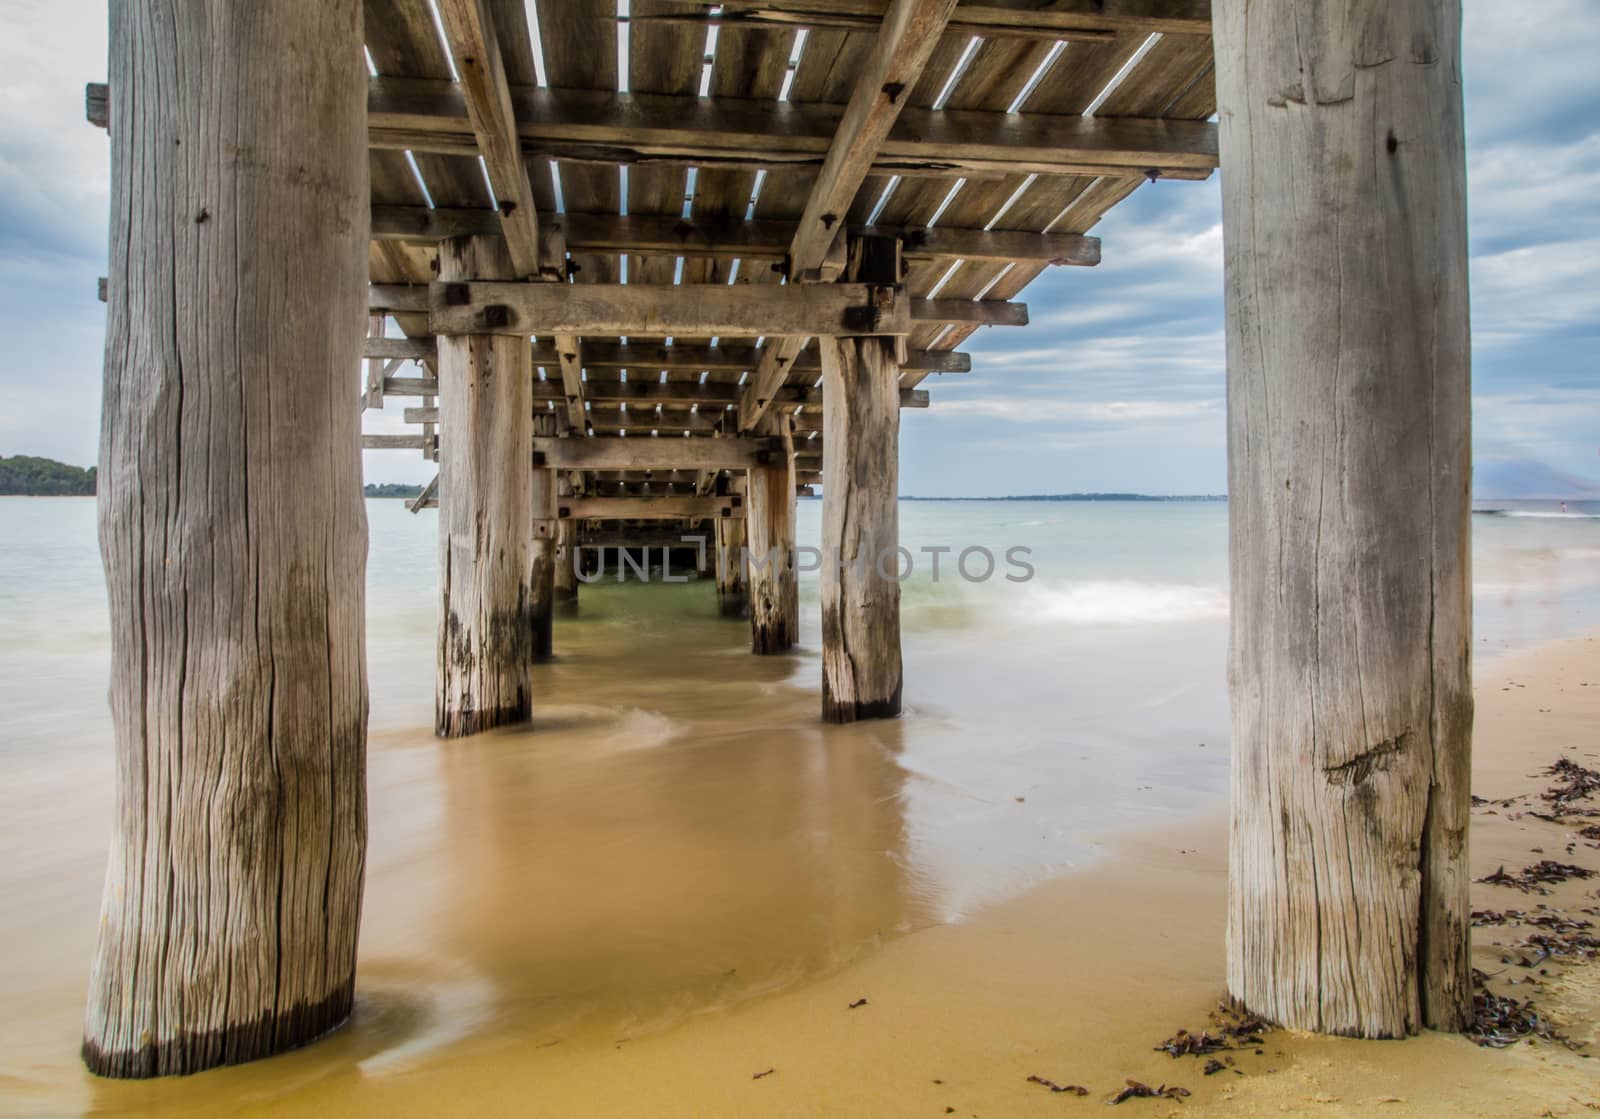 Under the fishing pier on the Beach